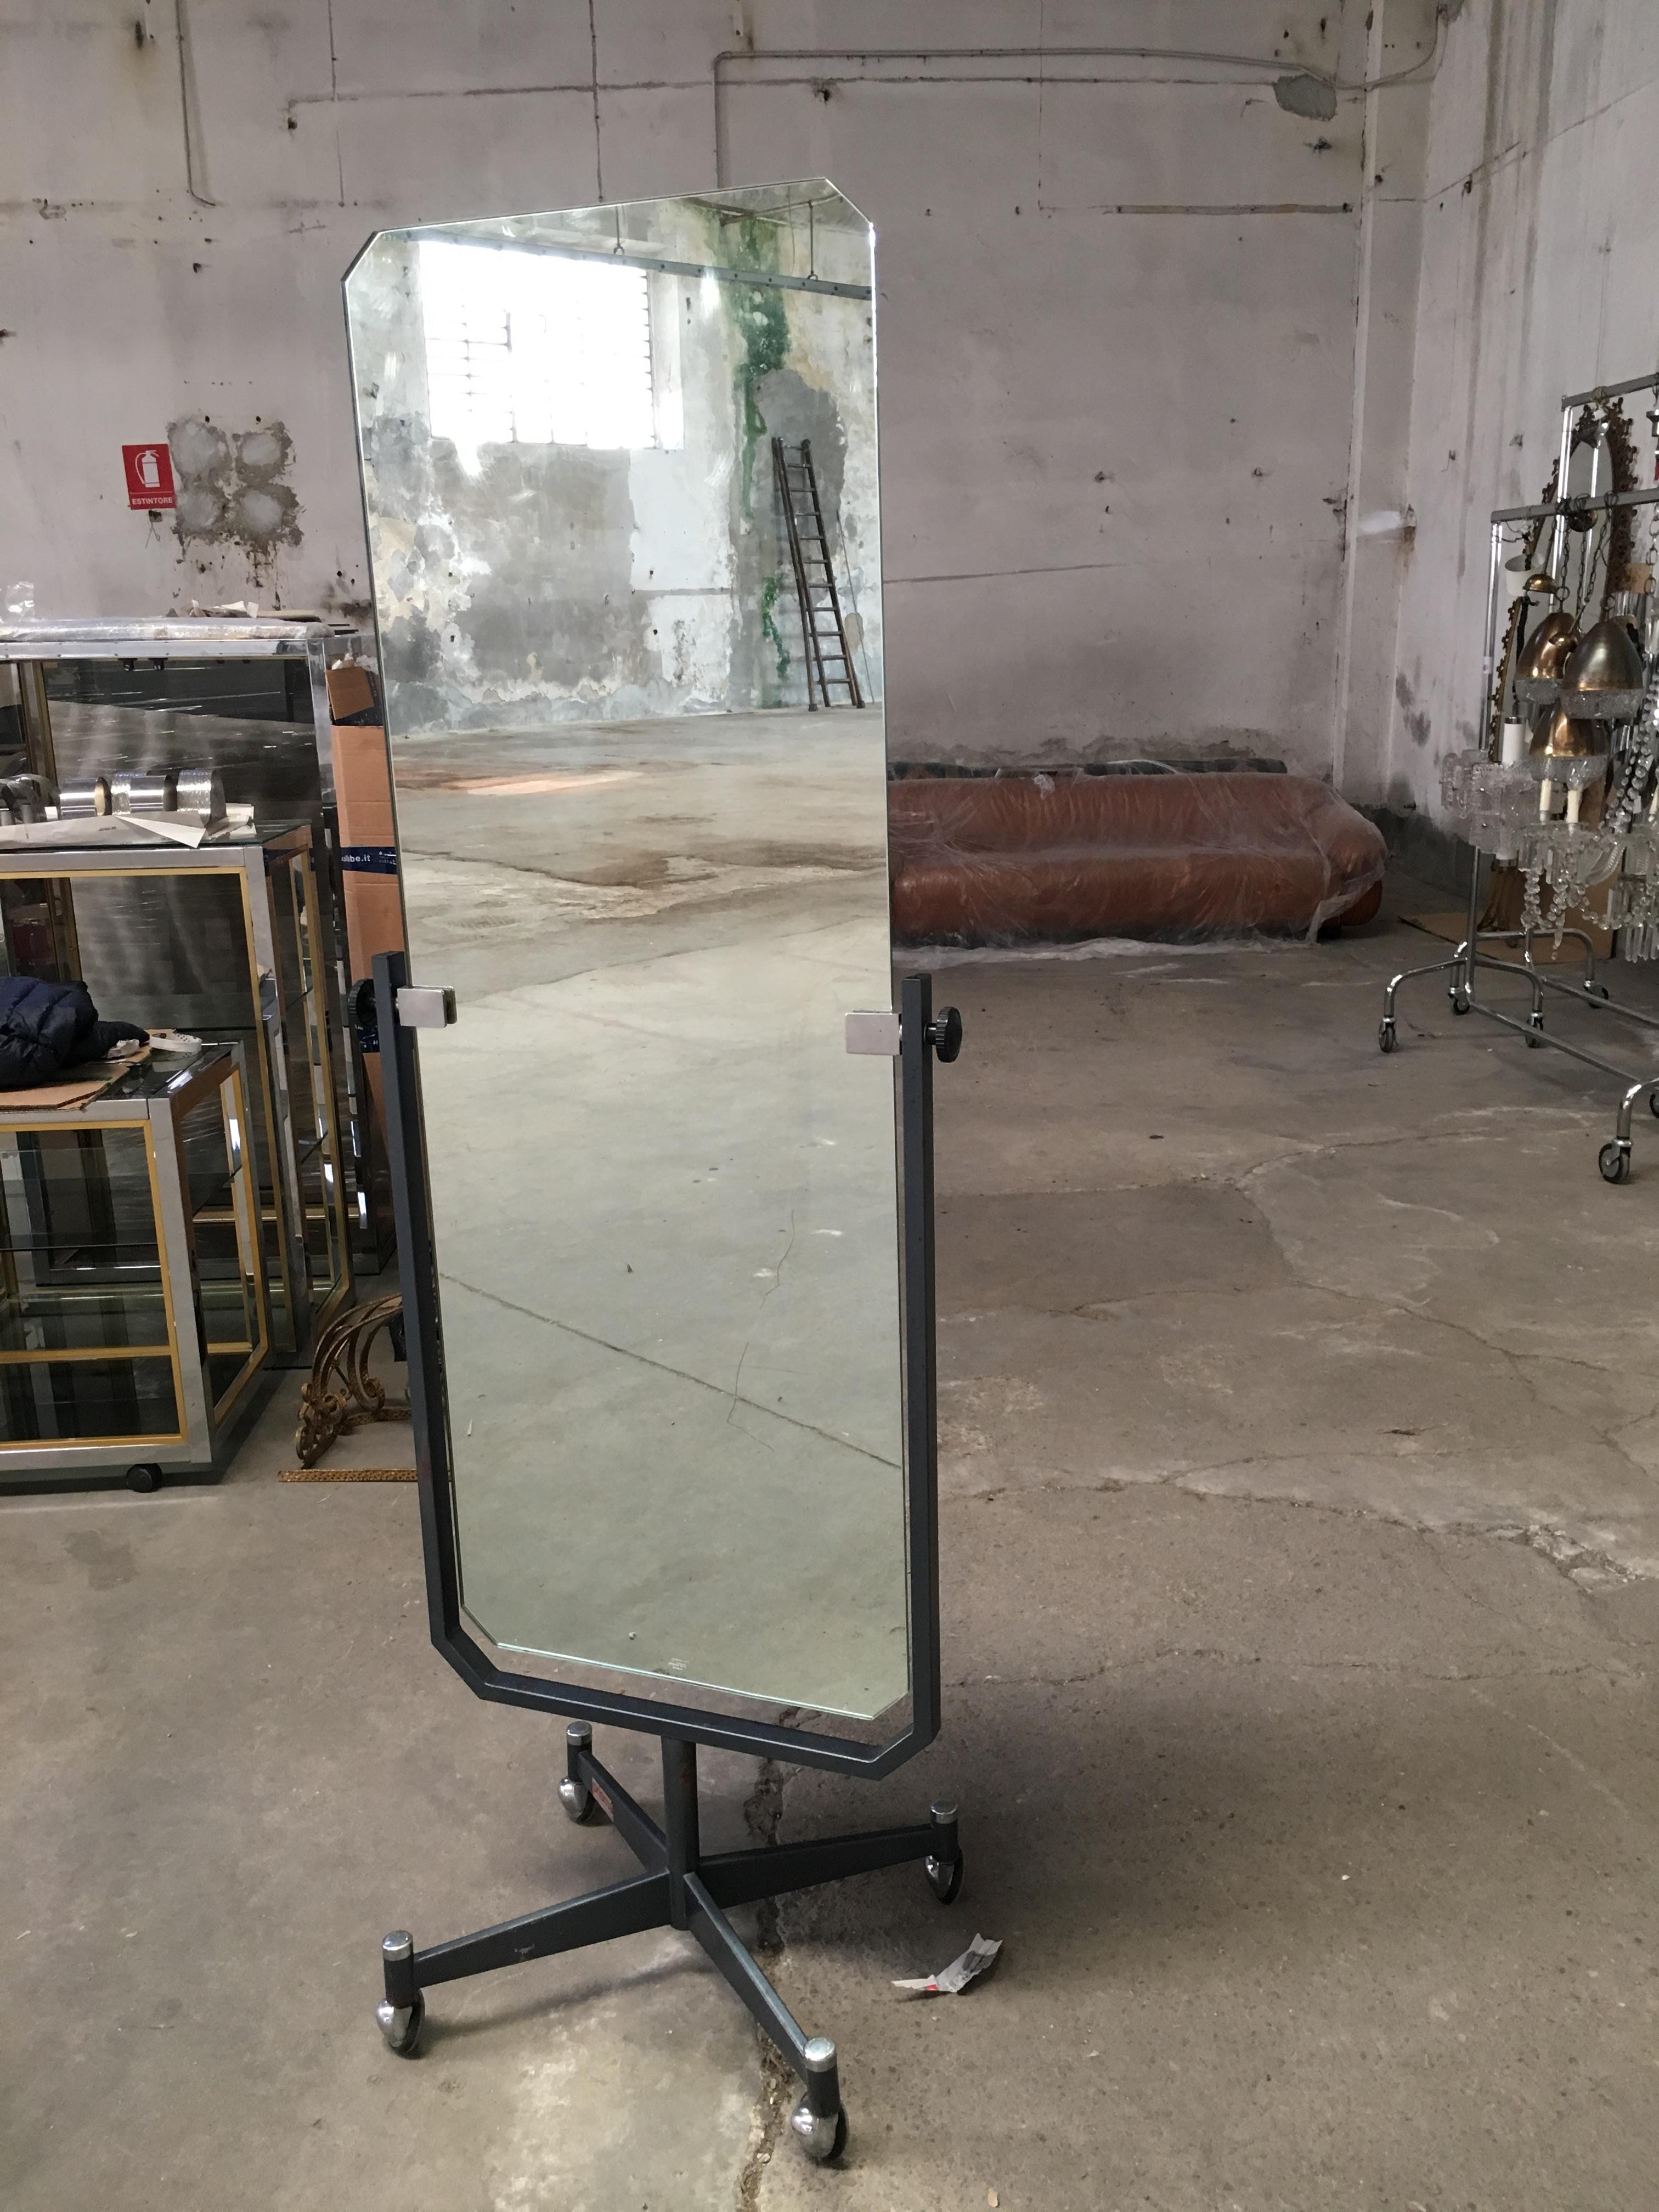 Mid-Century Modern Italian full length freestanding mirror with black lacquered metal structure on wheels.
The mirror is in very good vintage conditions.